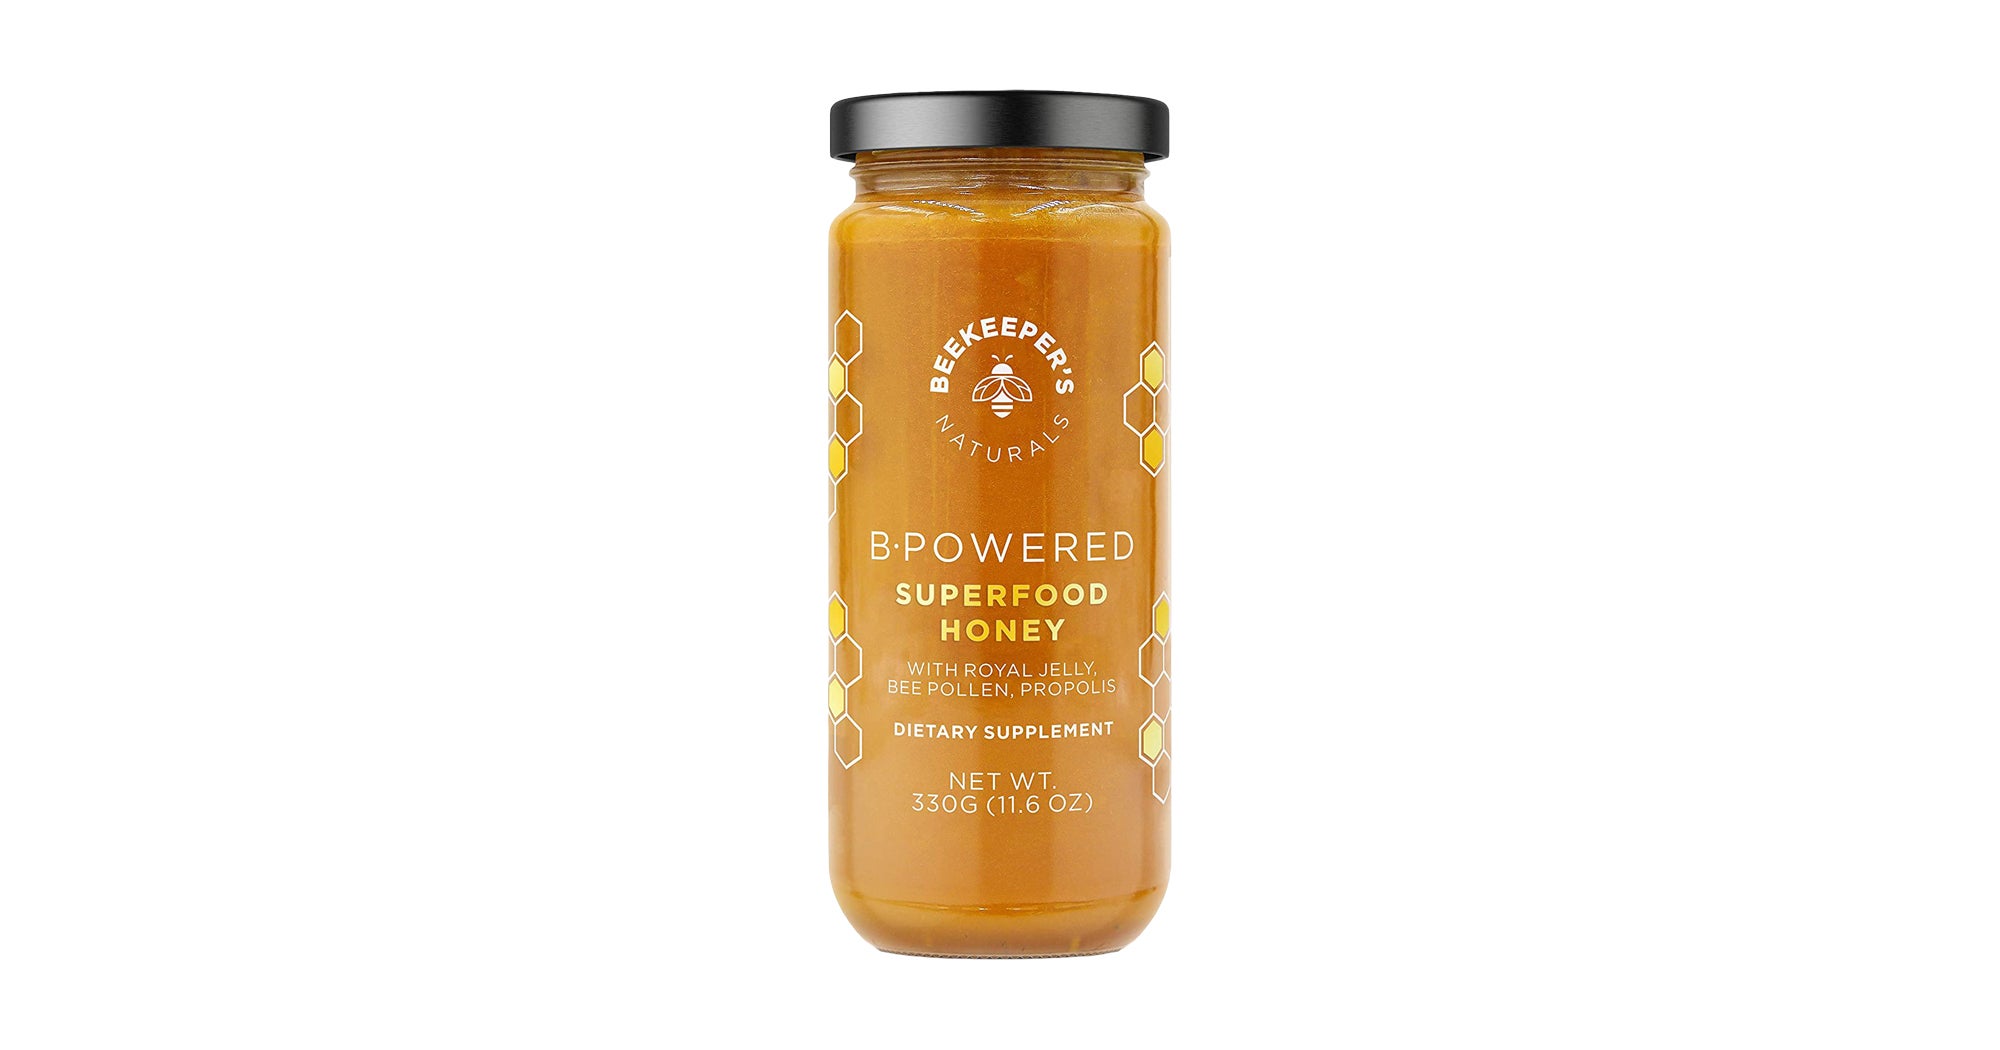 Beekeepers Naturals Superfood Brand Is Loved By Celebs